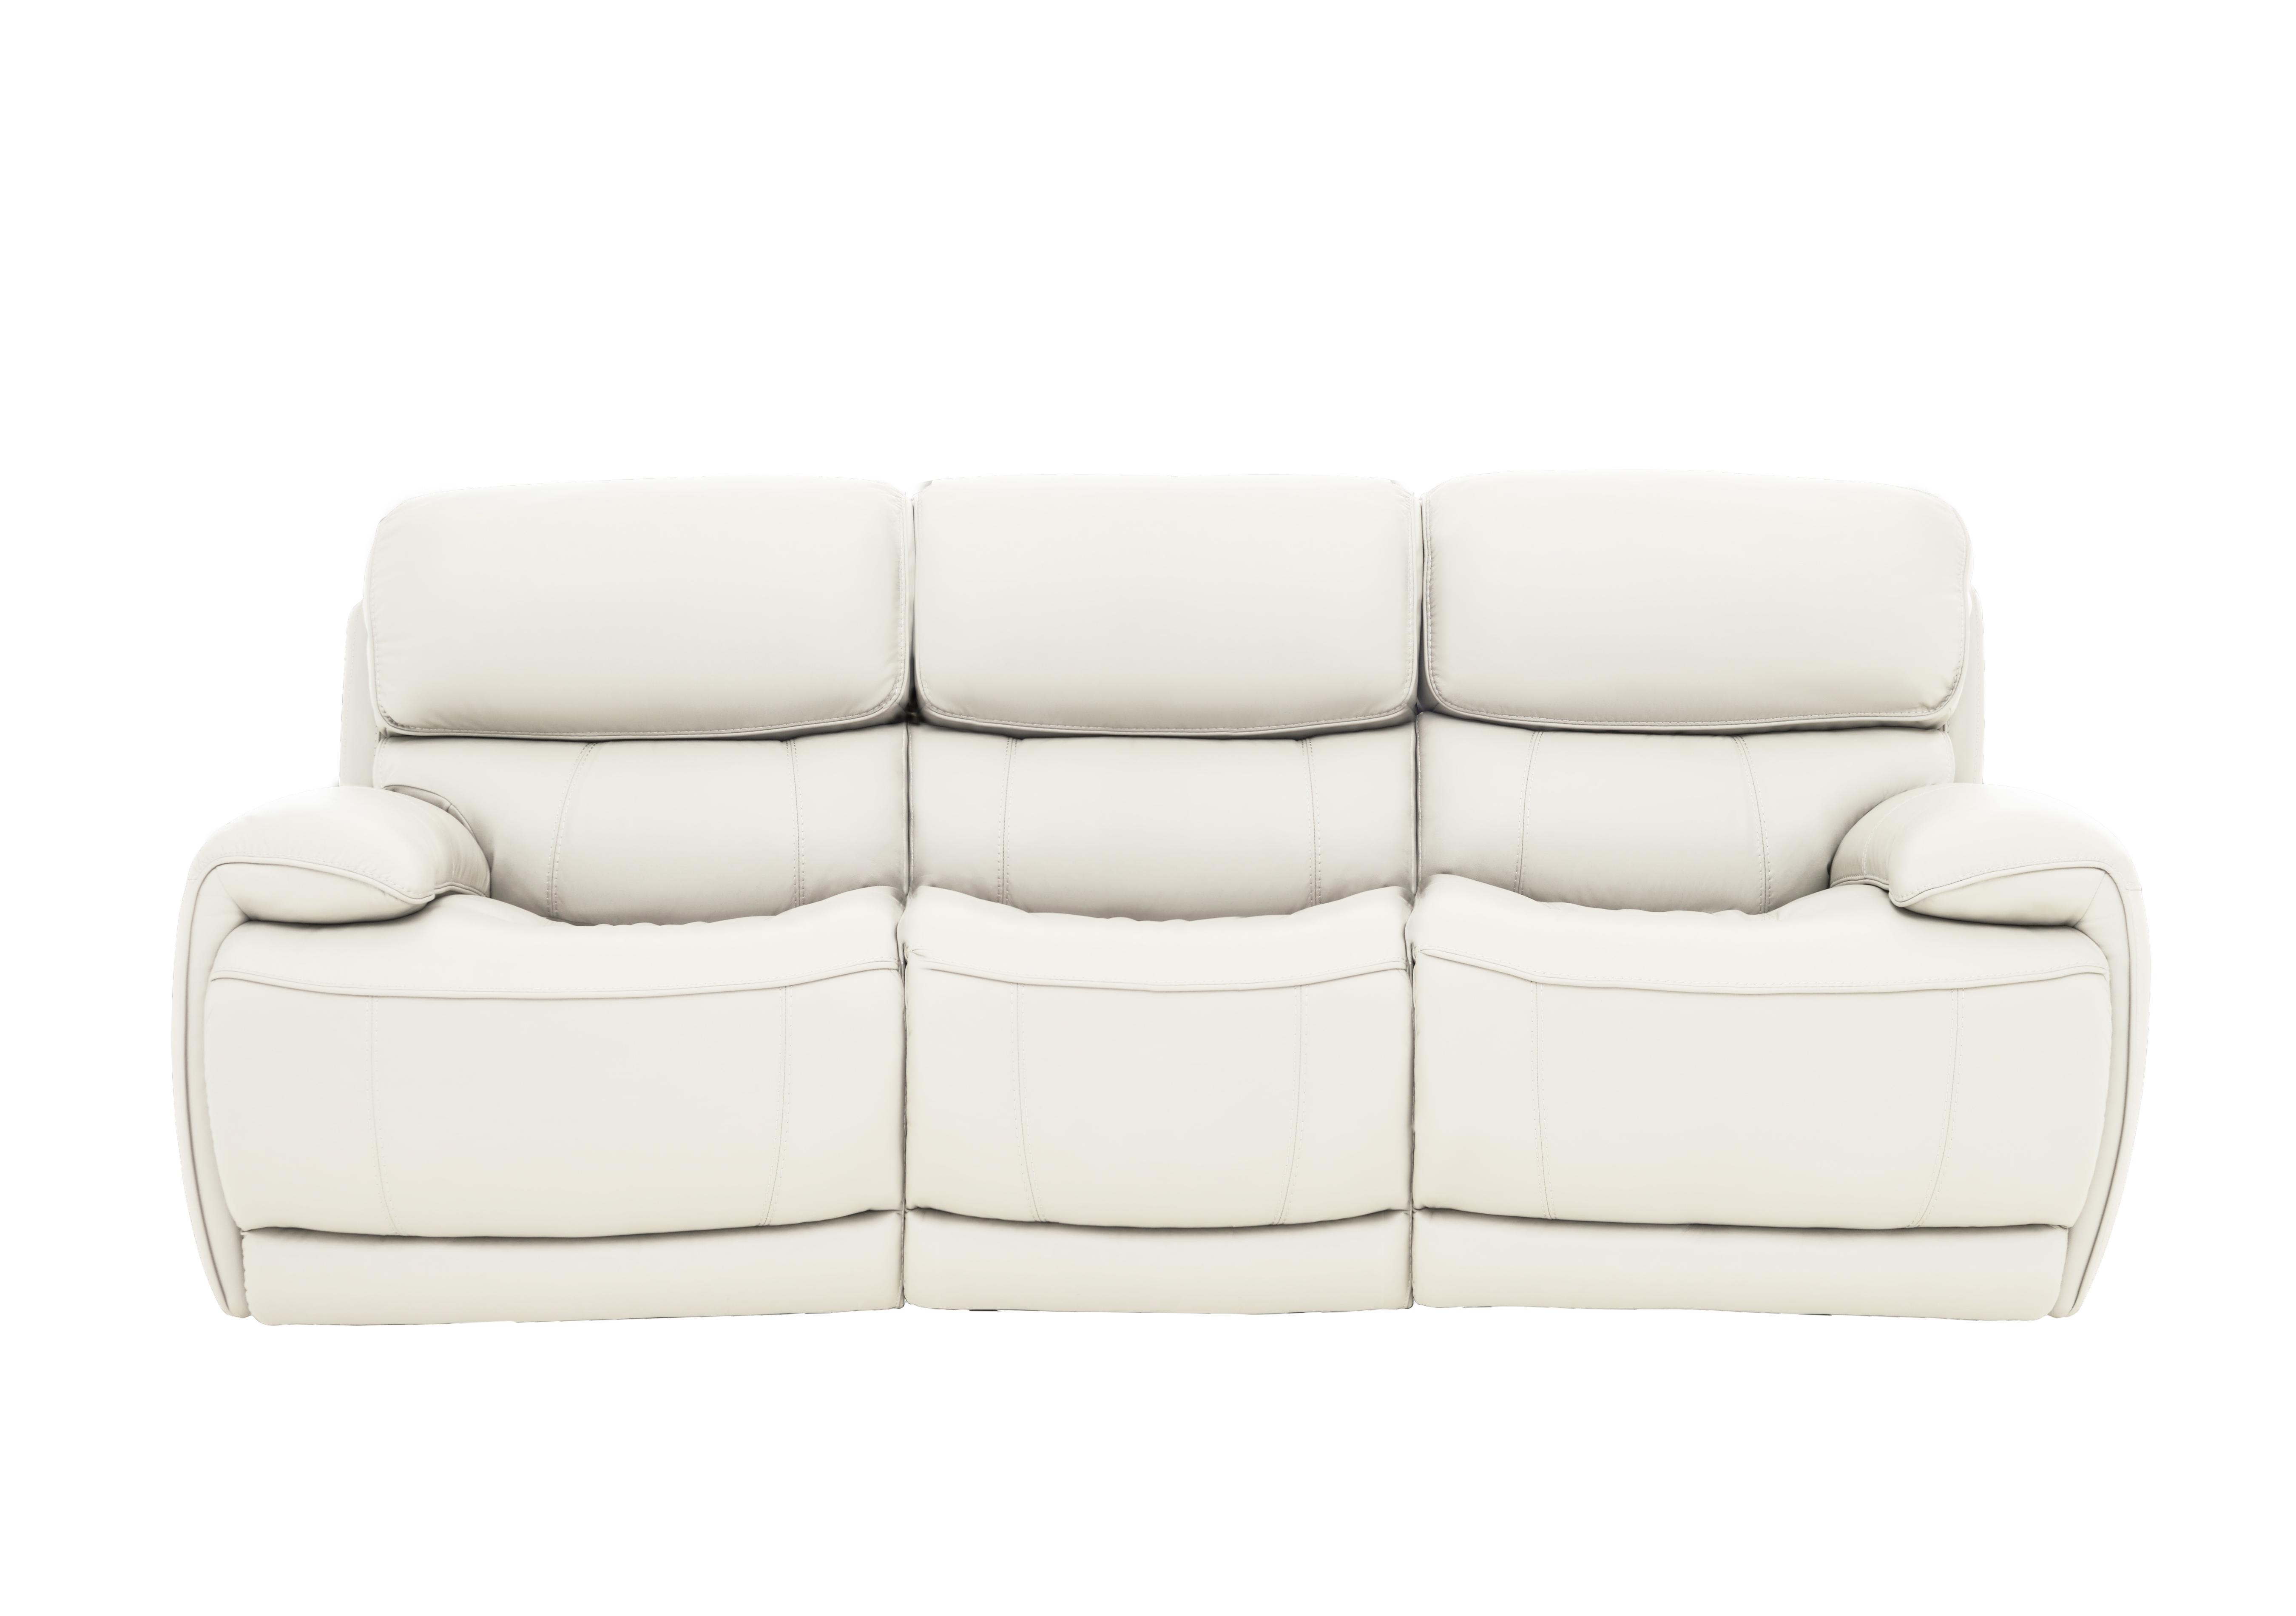 Rocco 3 Seater Leather Power Rocker Sofa with Power Headrests in Bv-744d Star White on Furniture Village